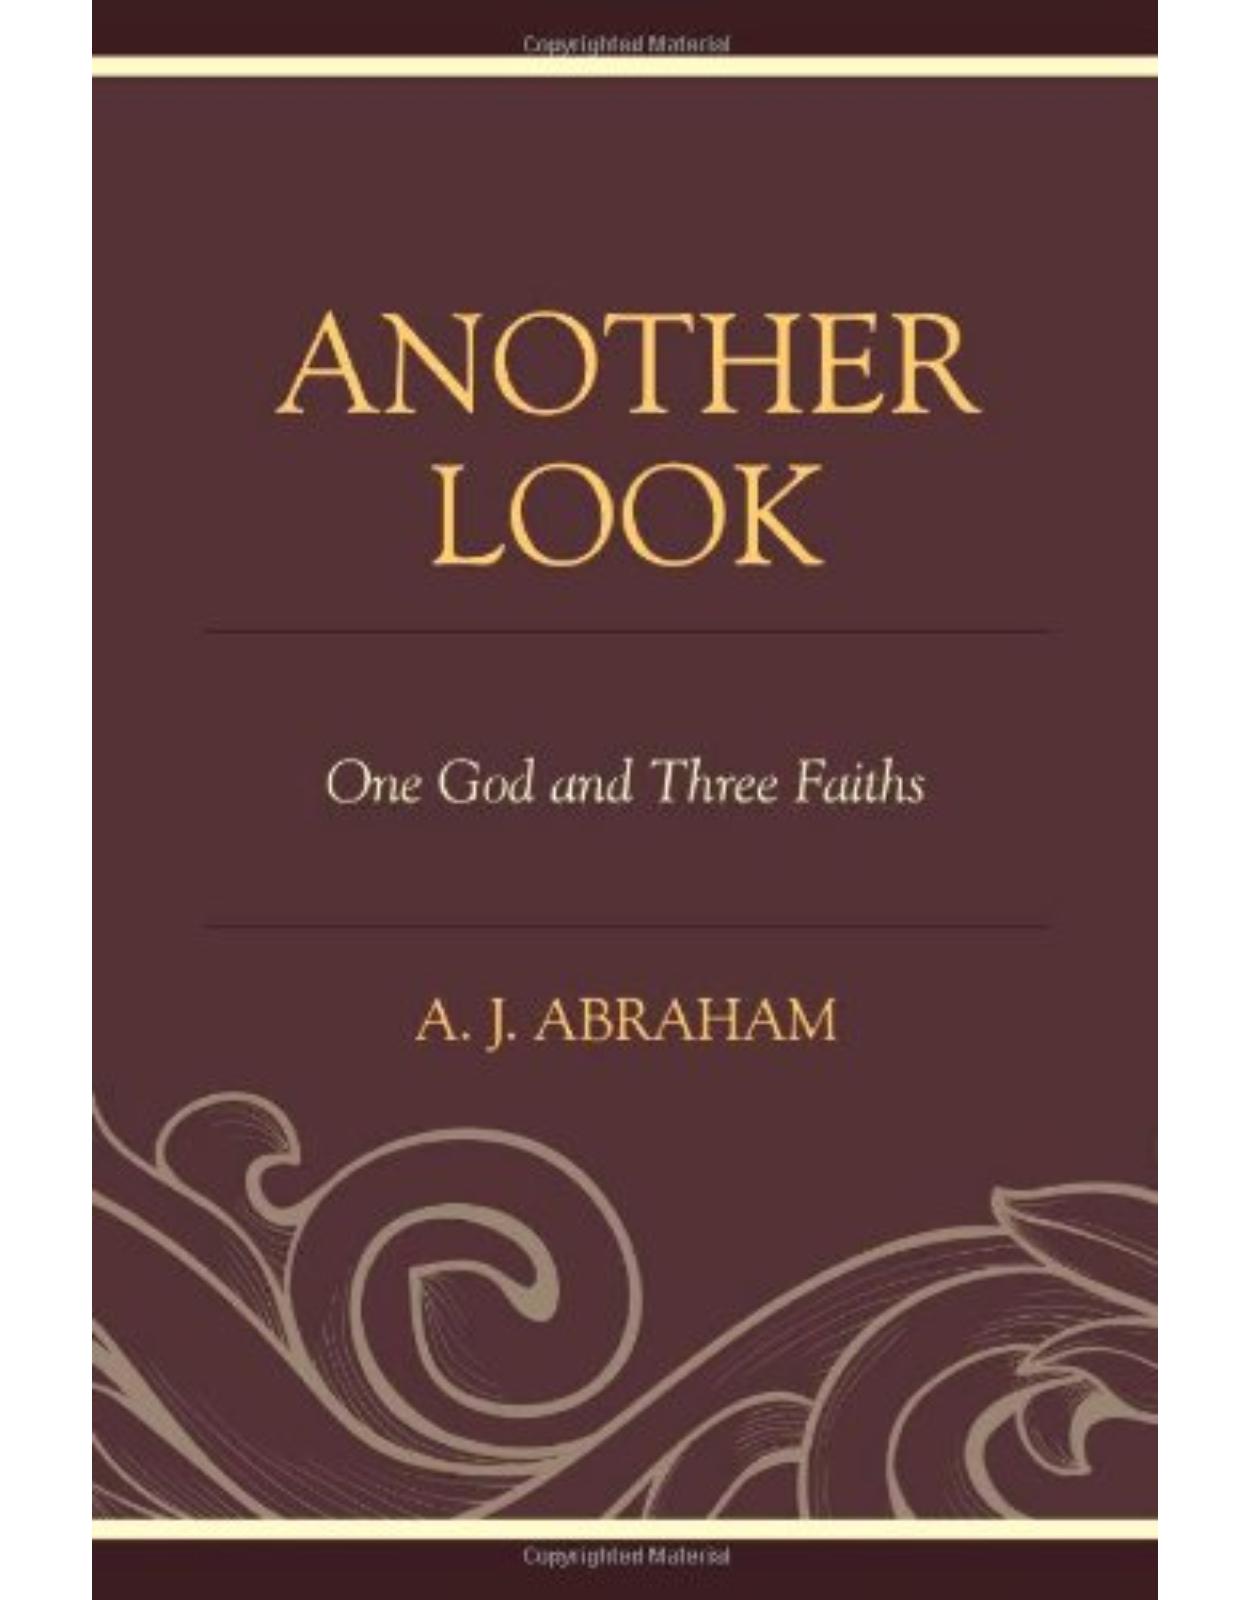 Another Look: One God and Three Faiths